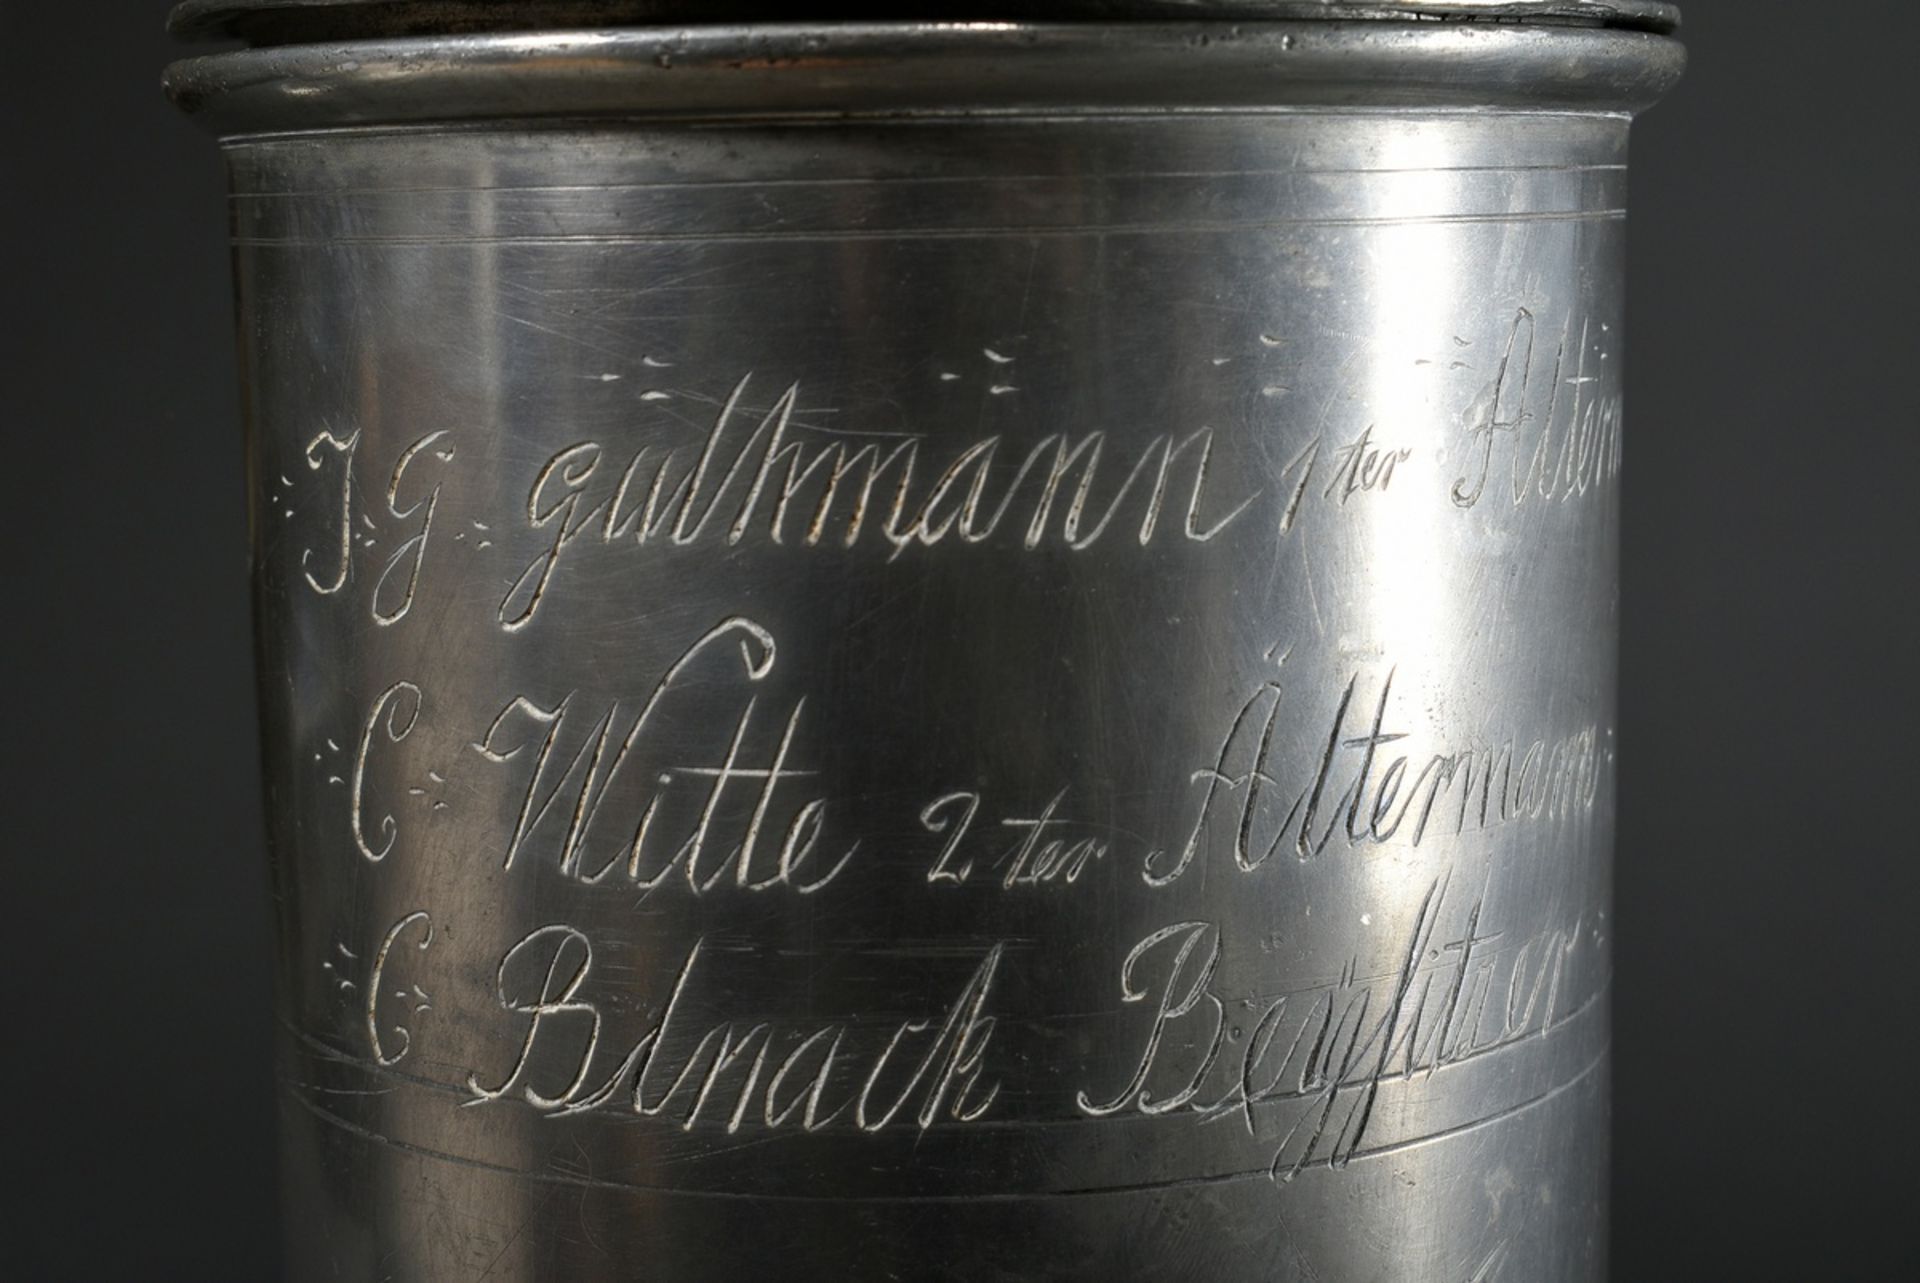 Large pewter guild cup "Willkomm" with plastic lid crowning "flag bearer", engraved inscription "Es - Image 12 of 12